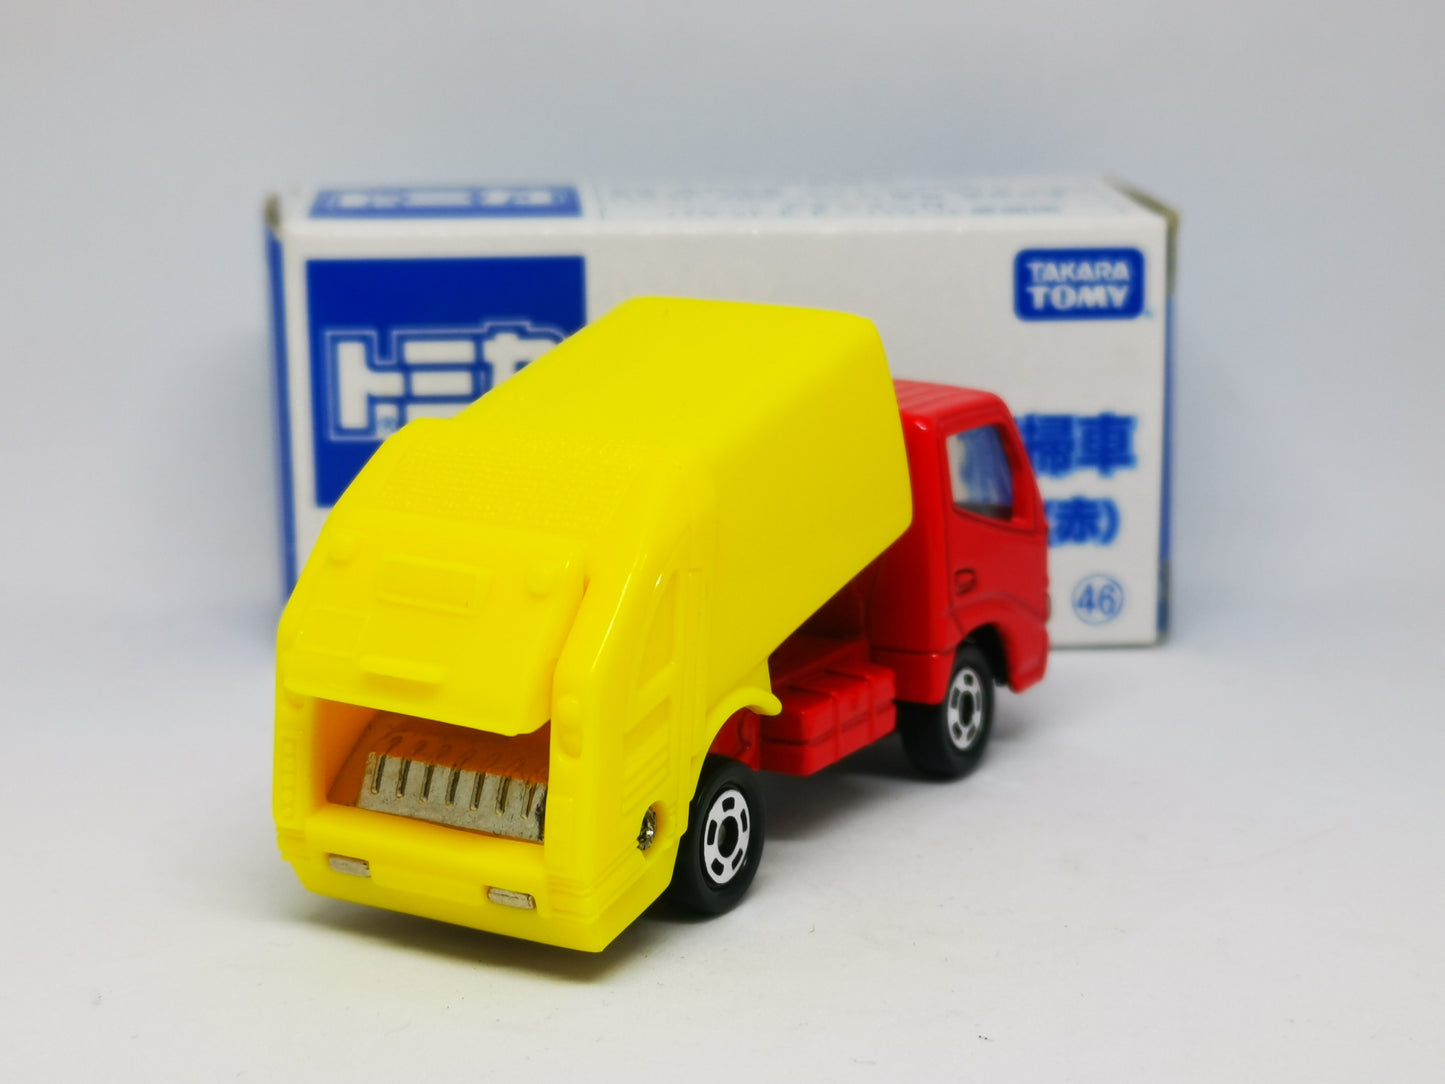 Tomica EXPO #46 Toyota Dyna Refuse Truck (Red)